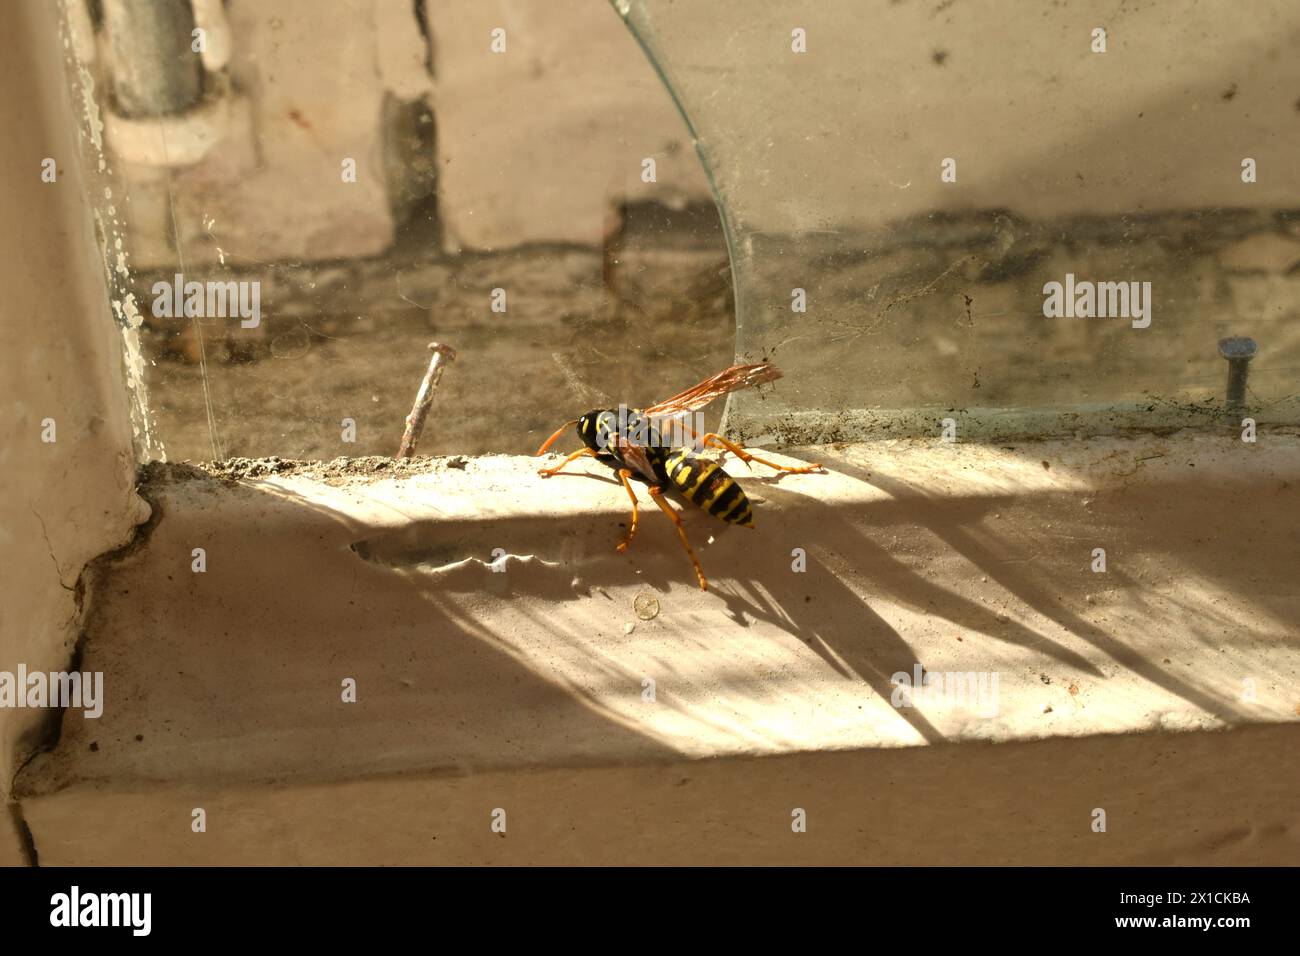 A wasp crawls along a dirty window frame trying to break free through the glass. Stock Photo